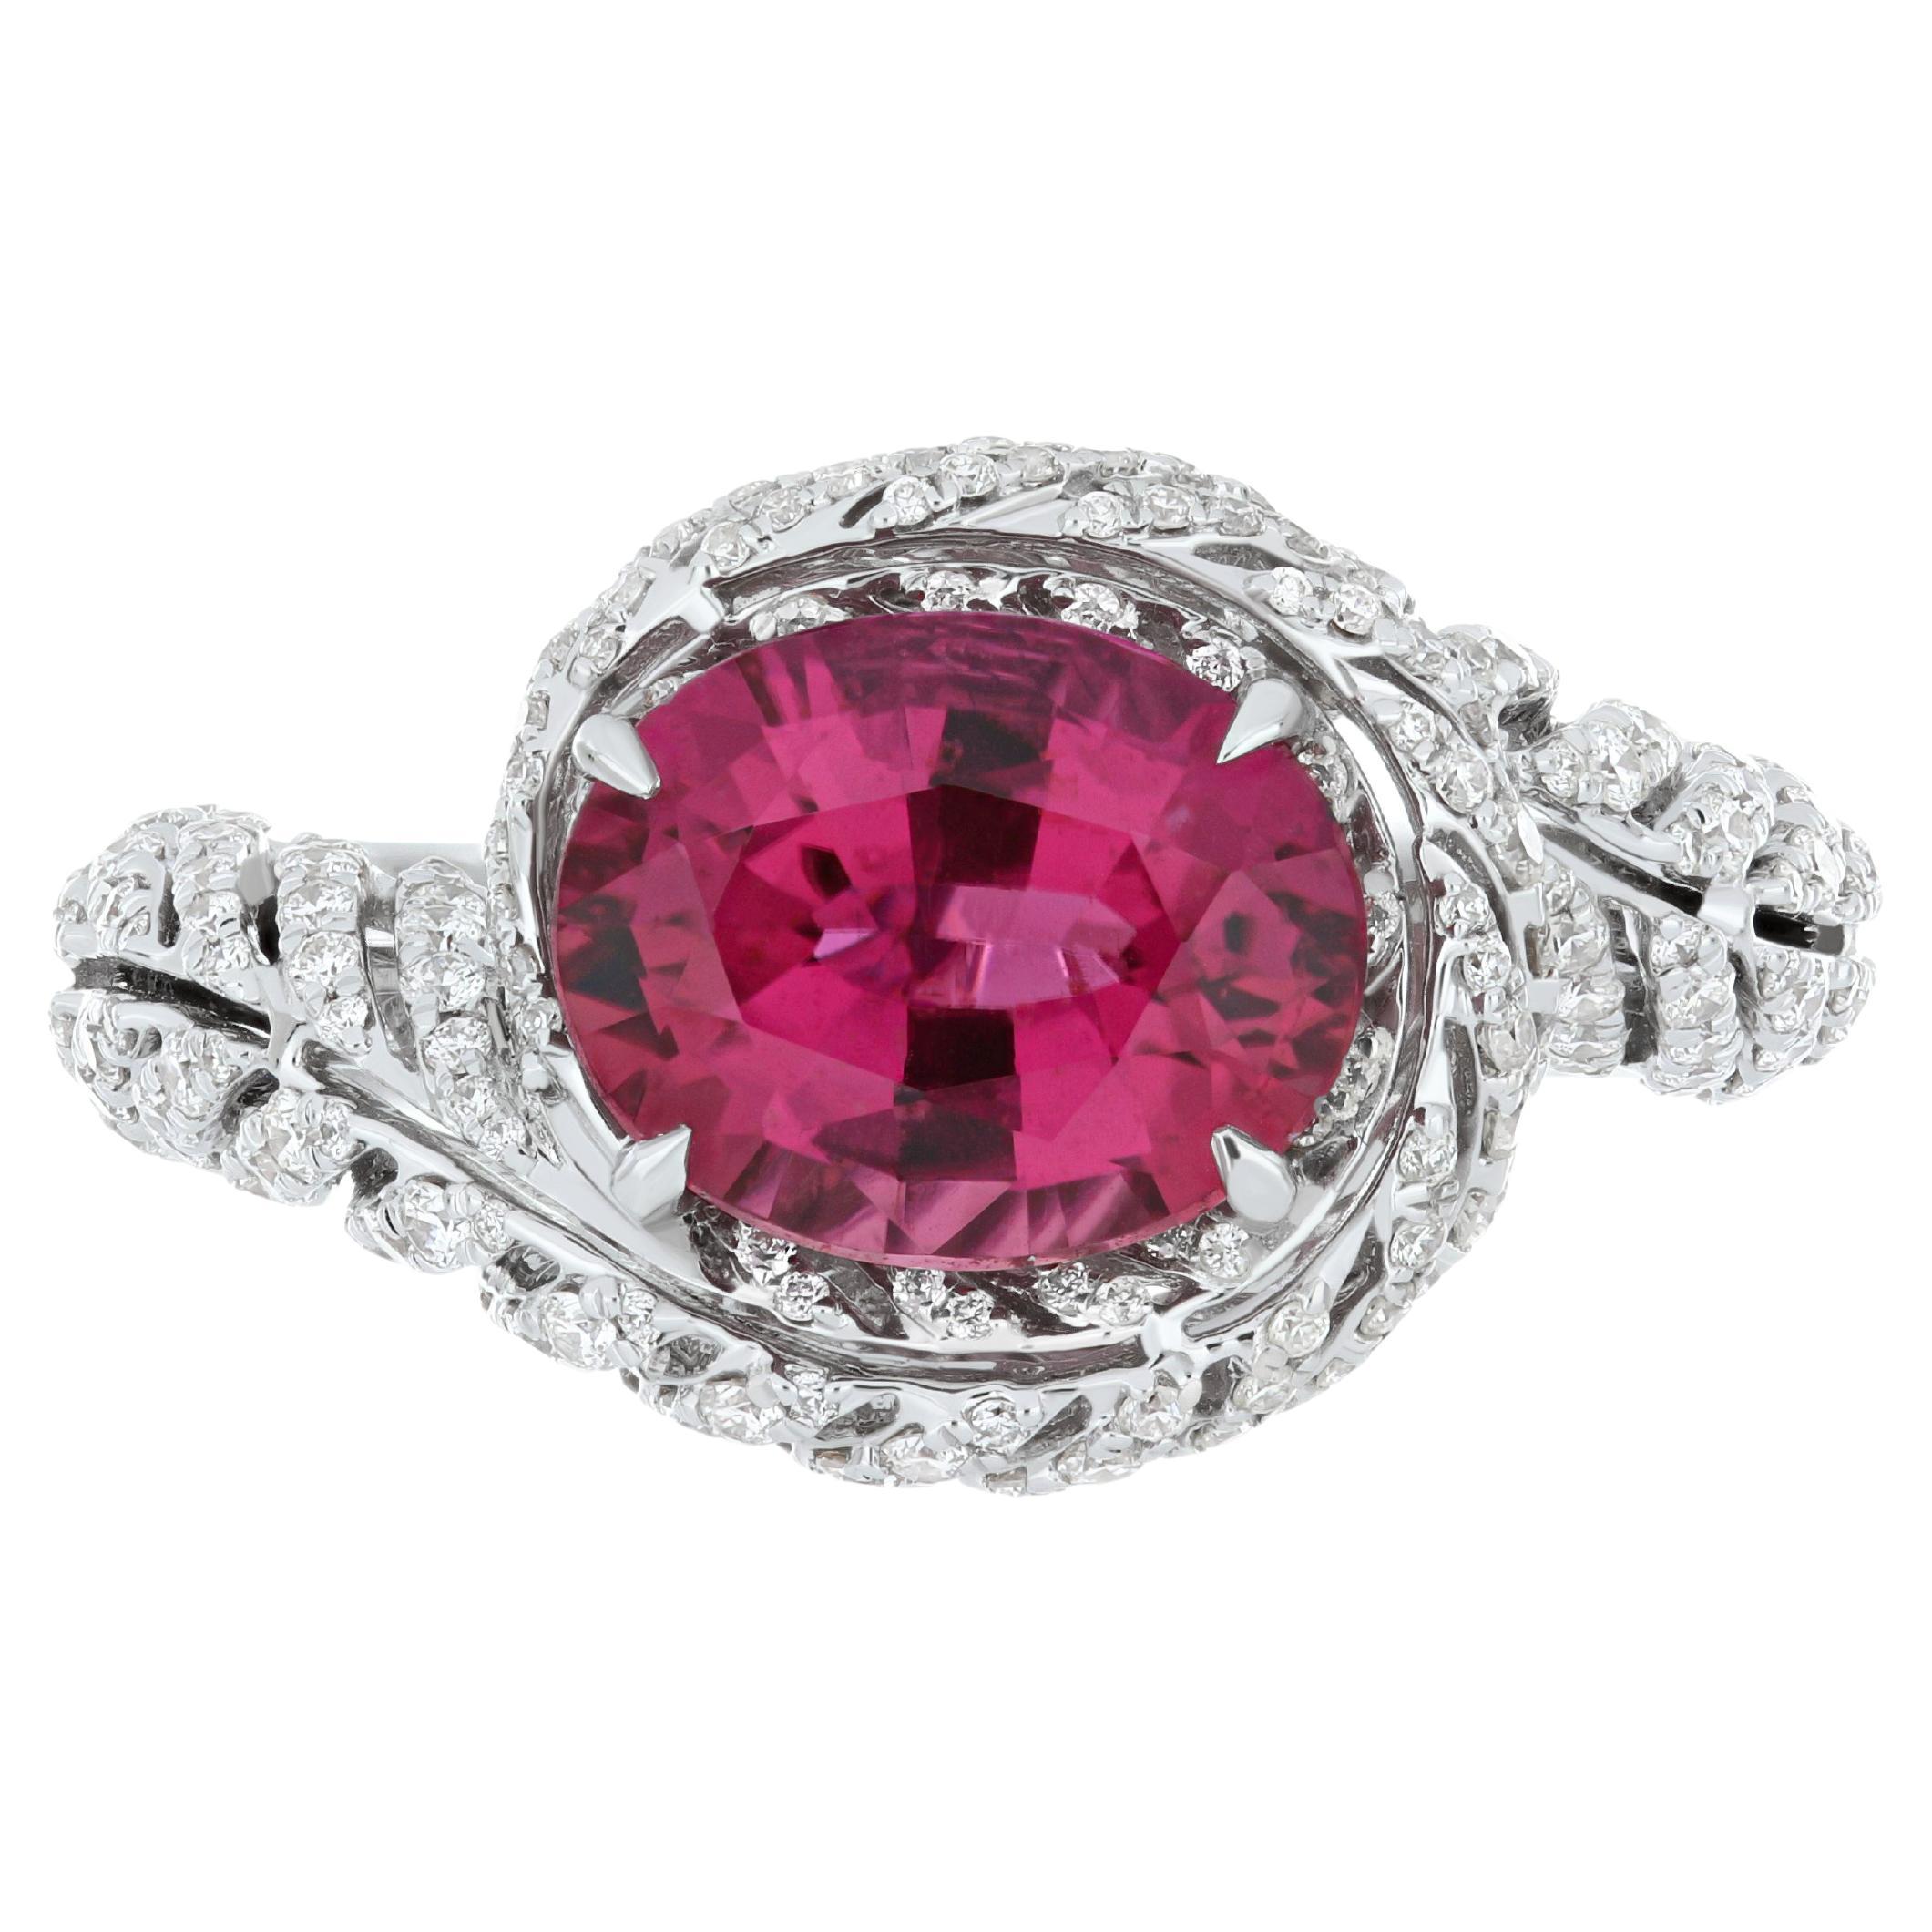 3.2 Carat Rubellite and Diamond Studded Ring in 18K White Gold Ring